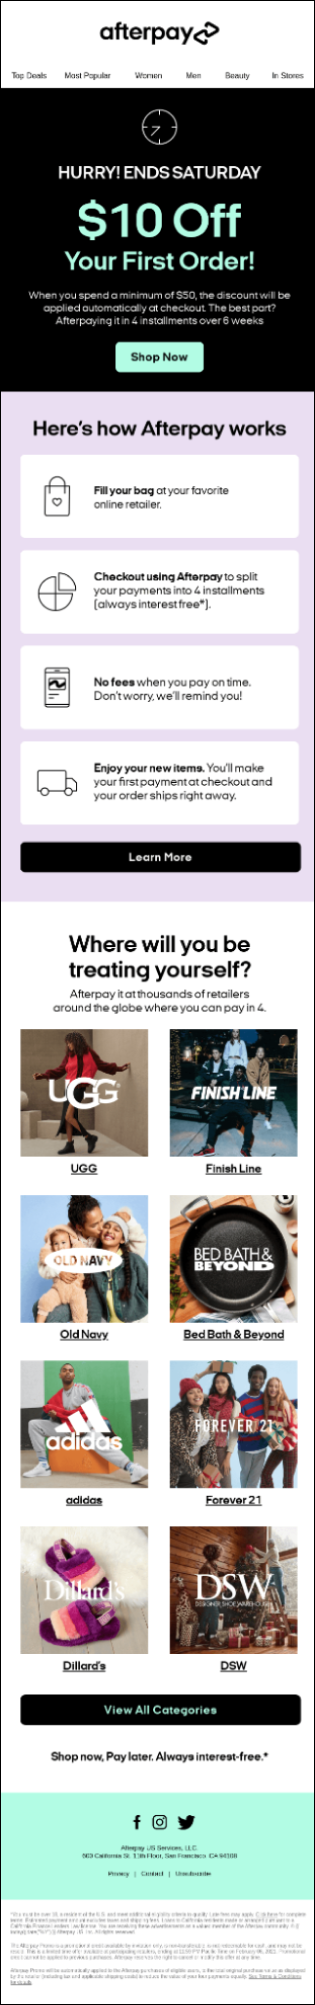 afterpay email